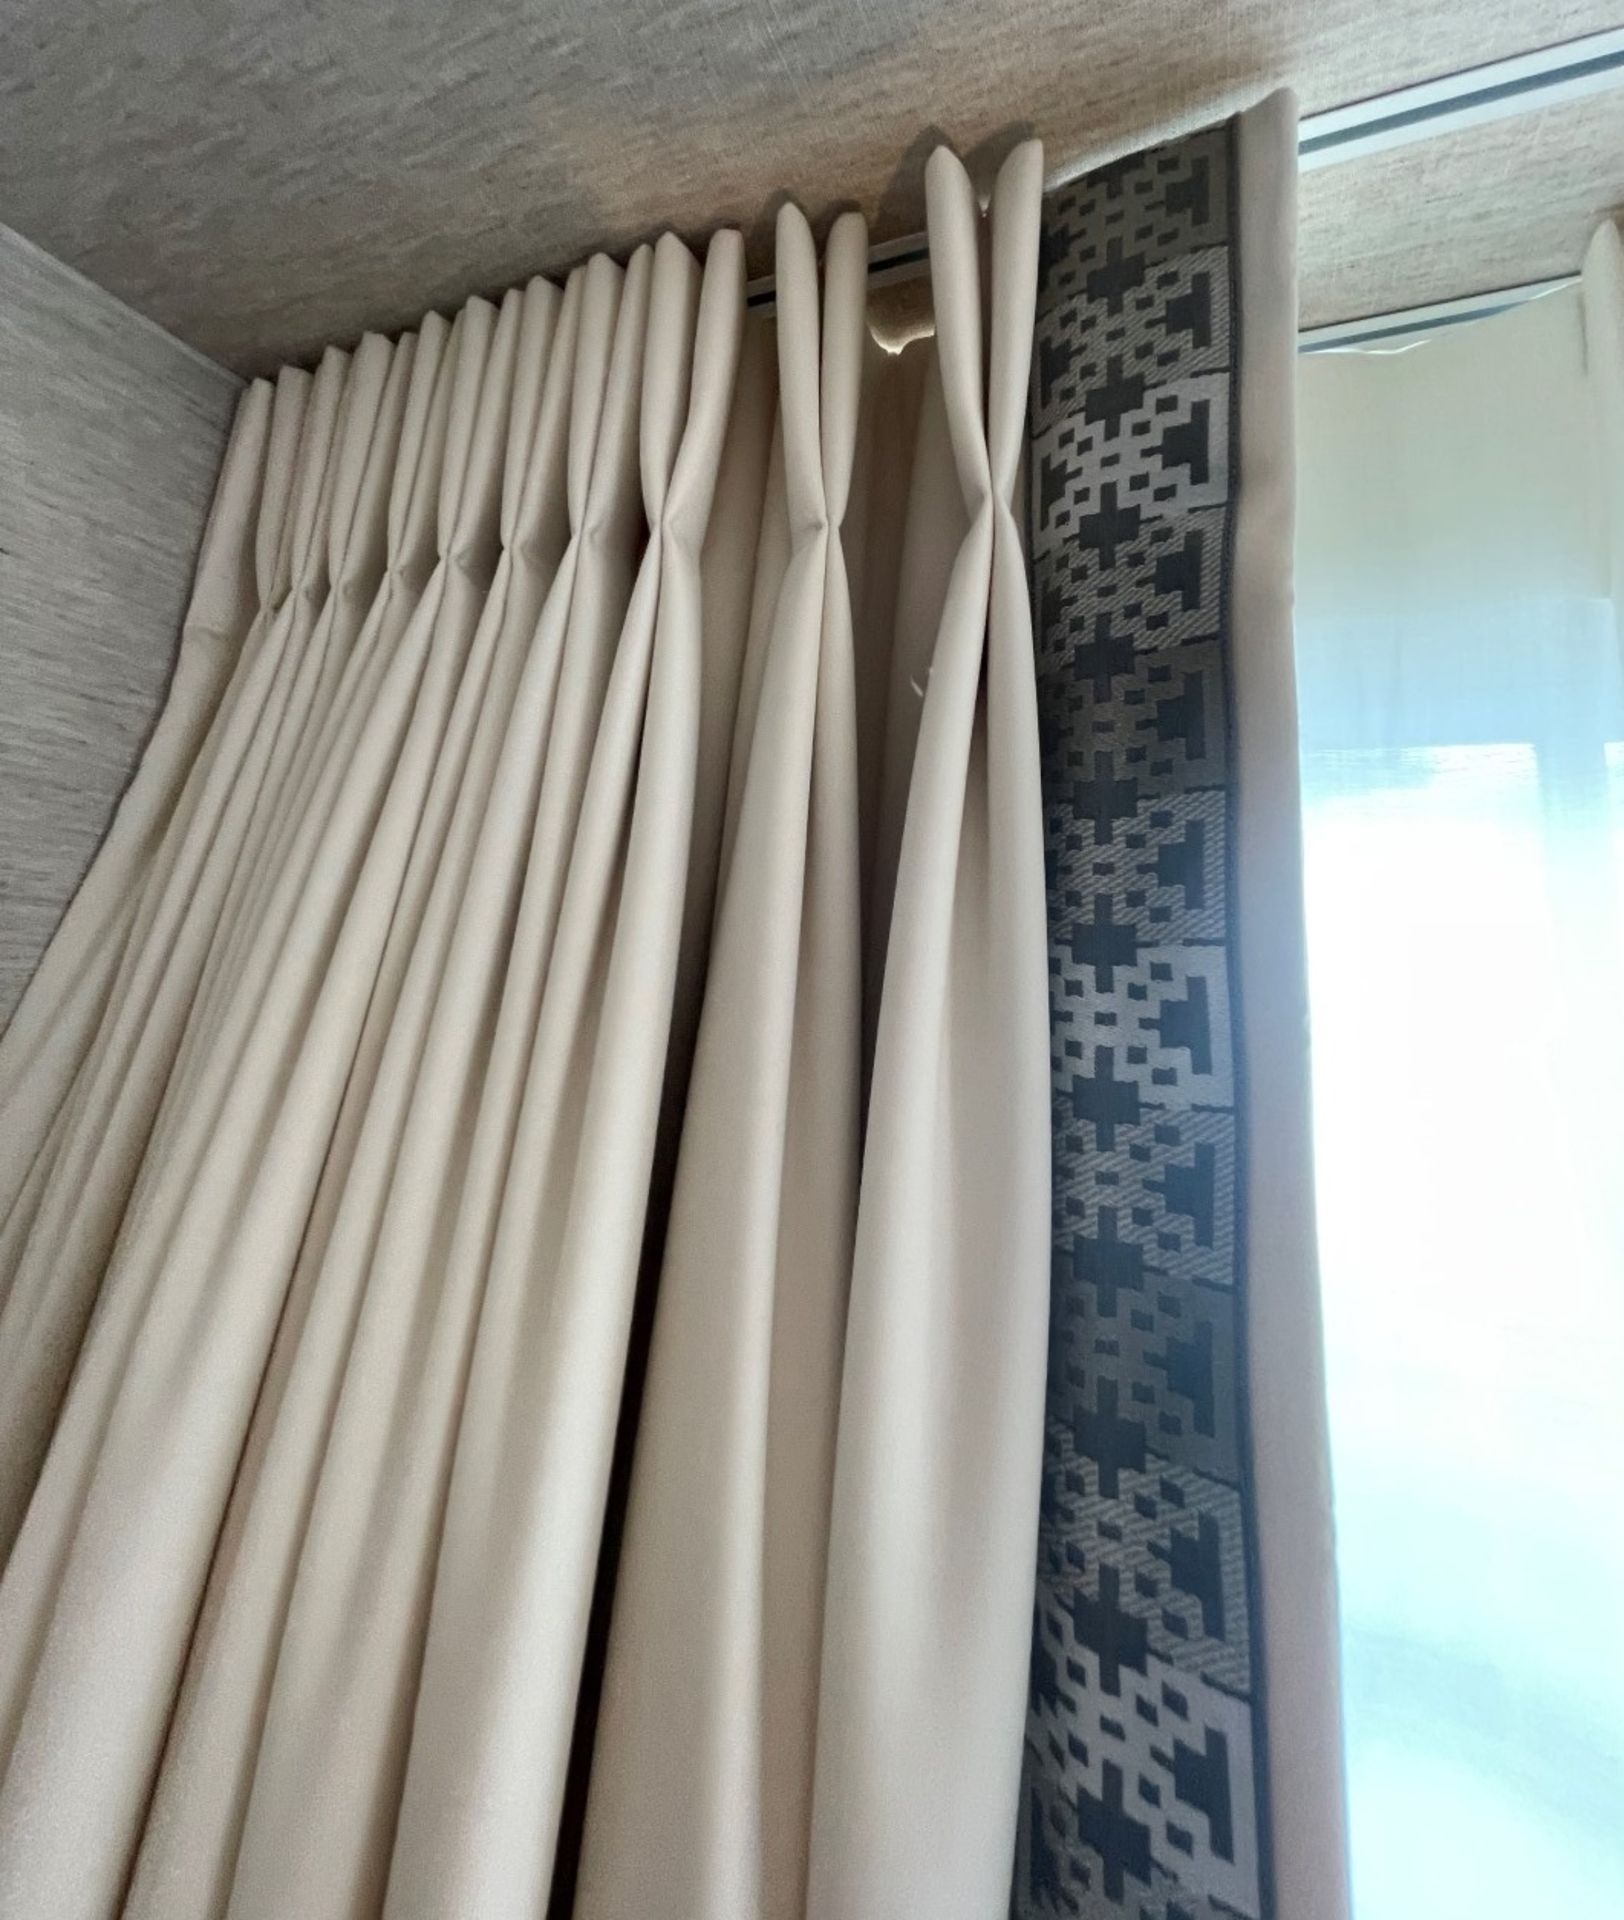 4 x Bespoke Made To Measure Premium Lined Curtains - Includes 1 x Pair & 2 x Single Blinds + Voiles - Image 3 of 13